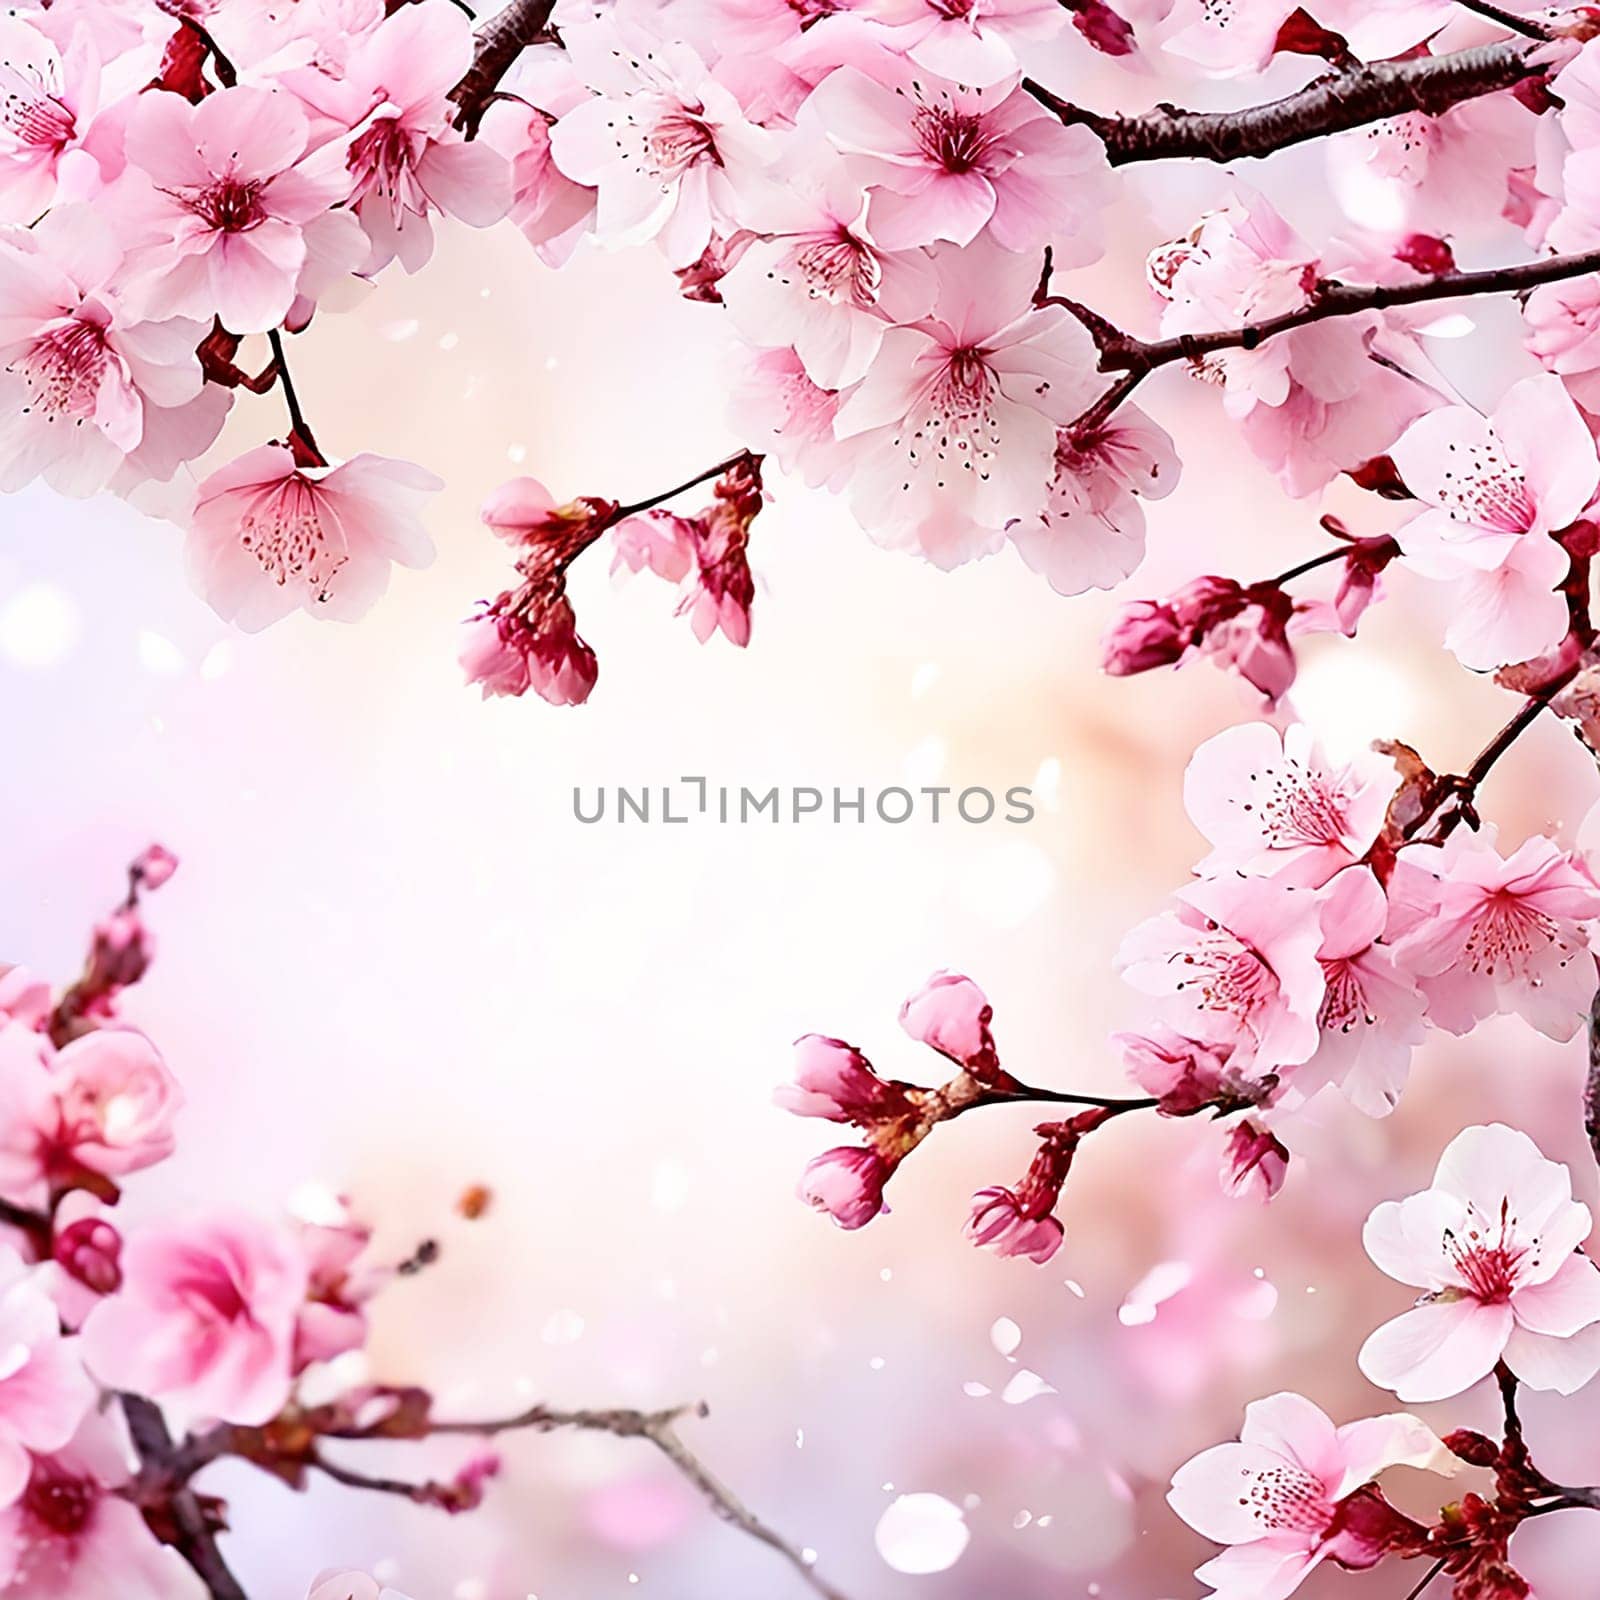 Sakura Splendor: Blossom-filled Spring Banner with Cherry Blossoms and Floral Pattern